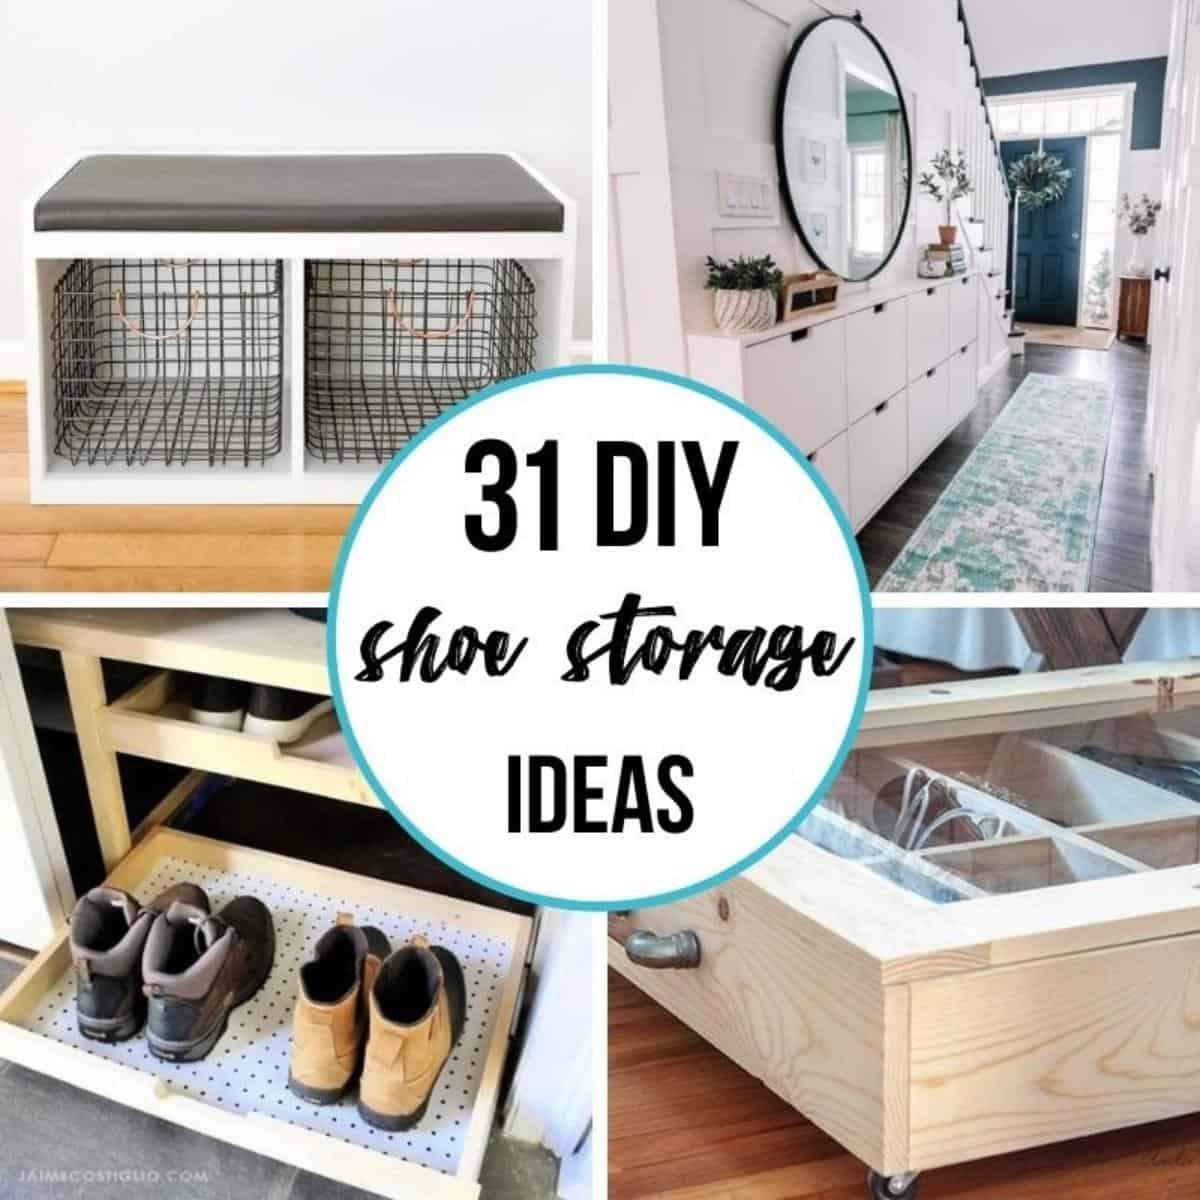 https://www.thehandymansdaughter.com/wp-content/uploads/2022/01/DIY-shoe-storage-ideas-featured-image.jpeg